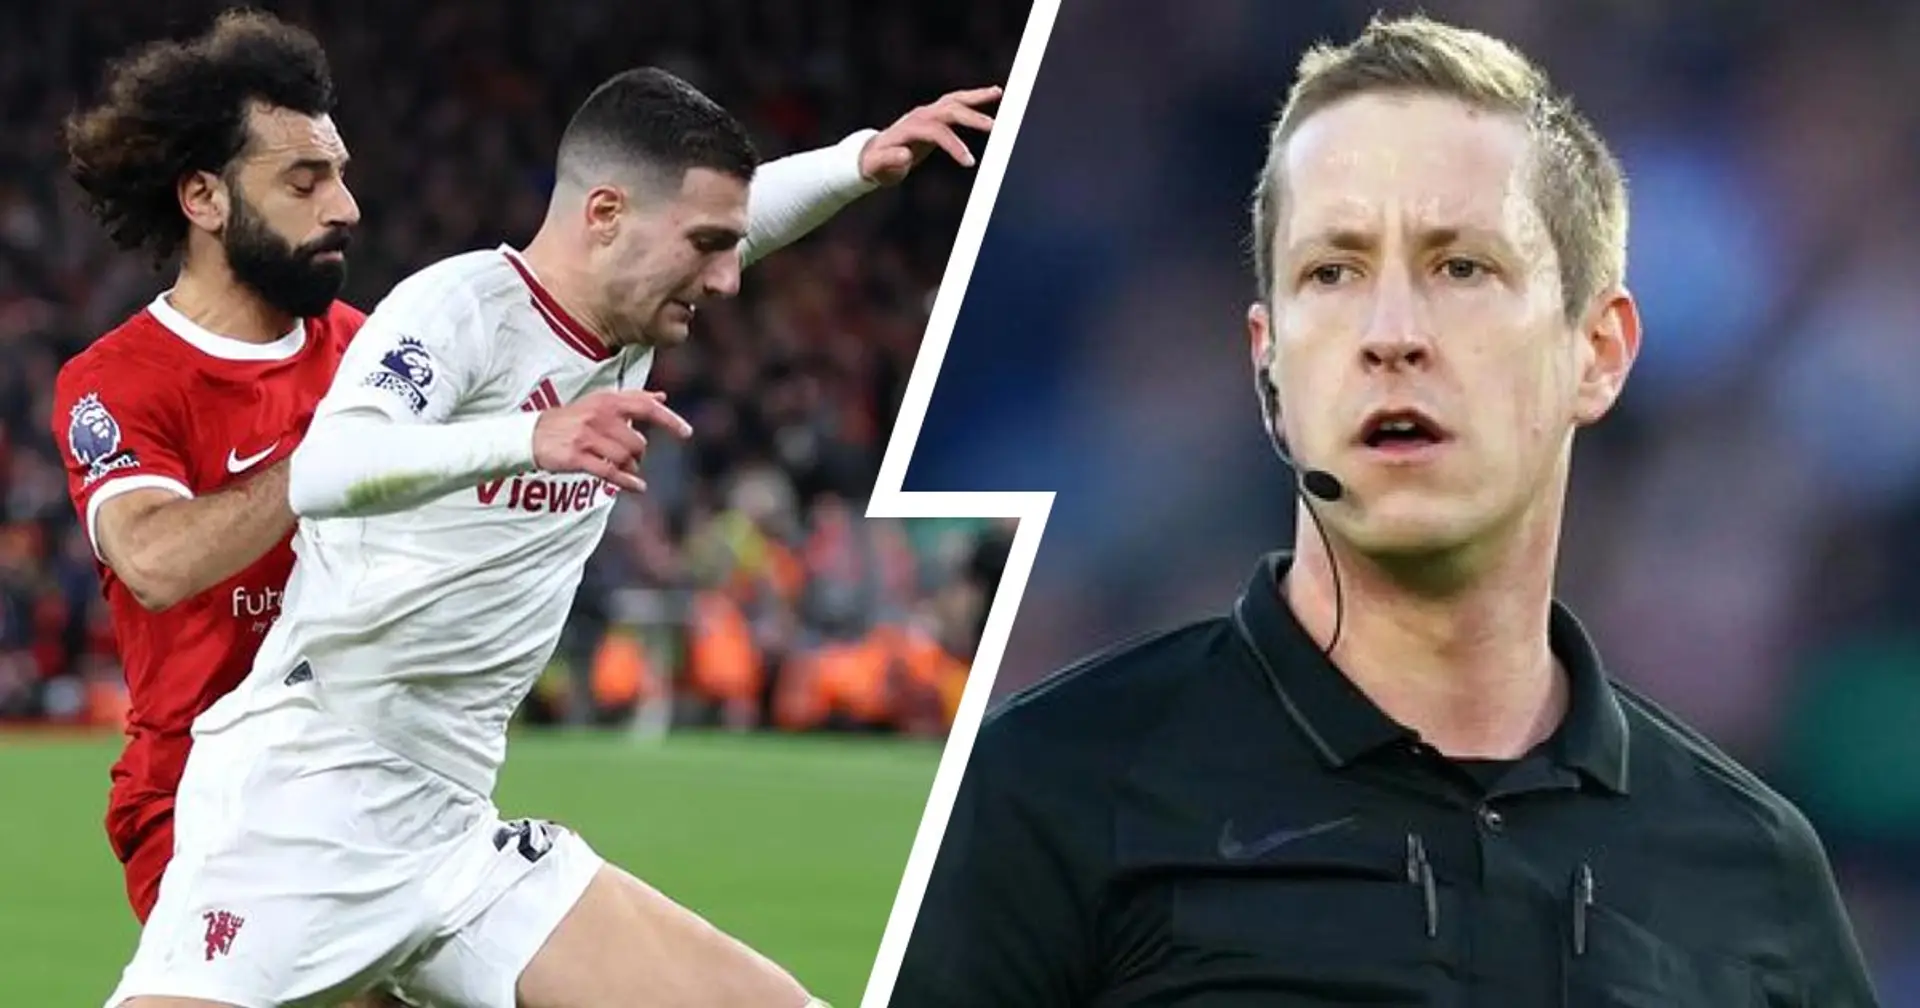 Referee named for Man United clash & 3 more under-radar stories at Liverpool